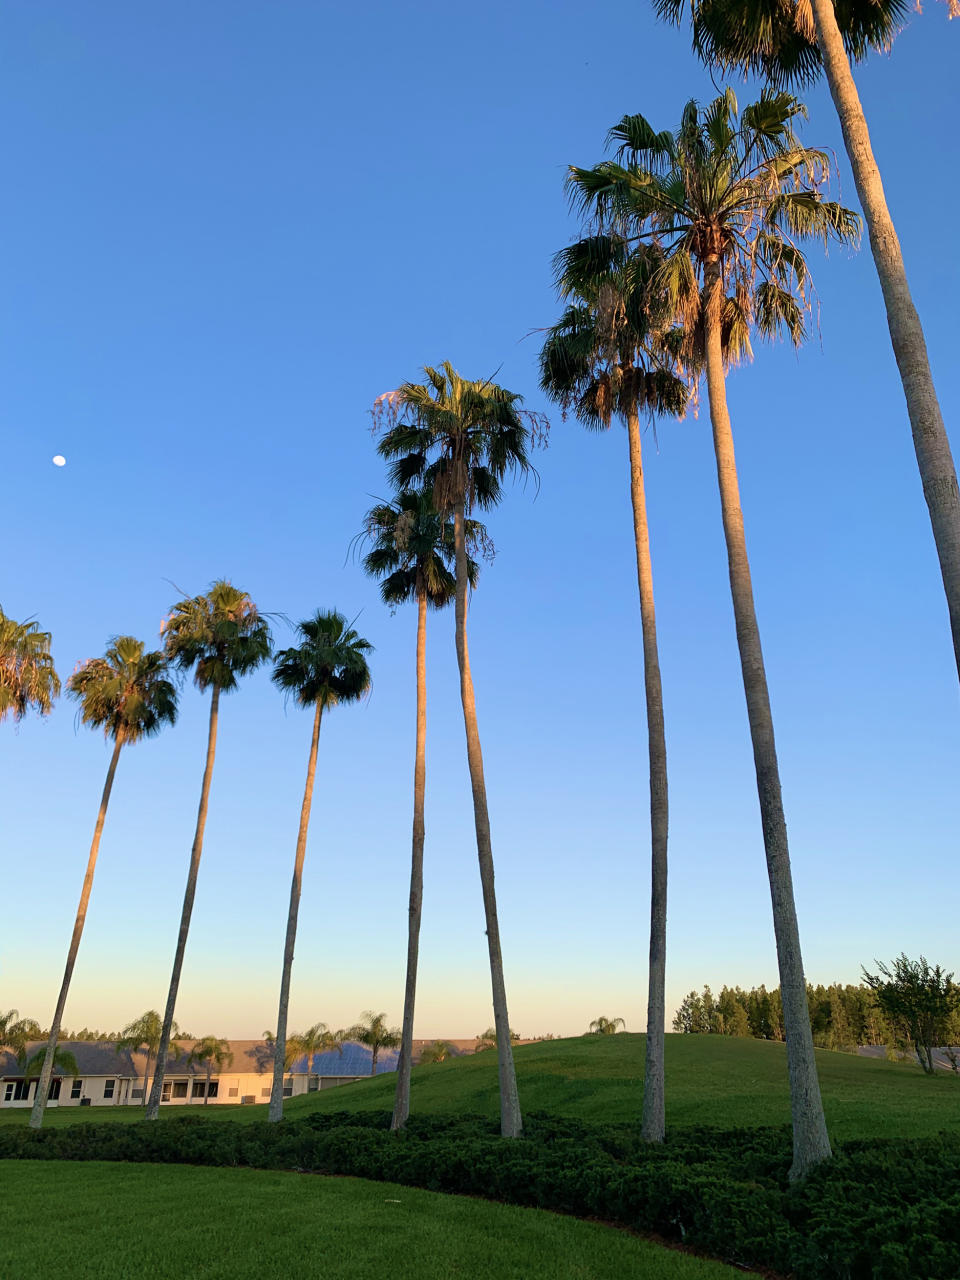 Two years have passed since Manna moved into her parents' retirement community, and while she is planning to soon return to New York City, she is savoring the remaining peaceful moments spent watching palm trees sway in the wind.  (Courtesy Christina Manna)